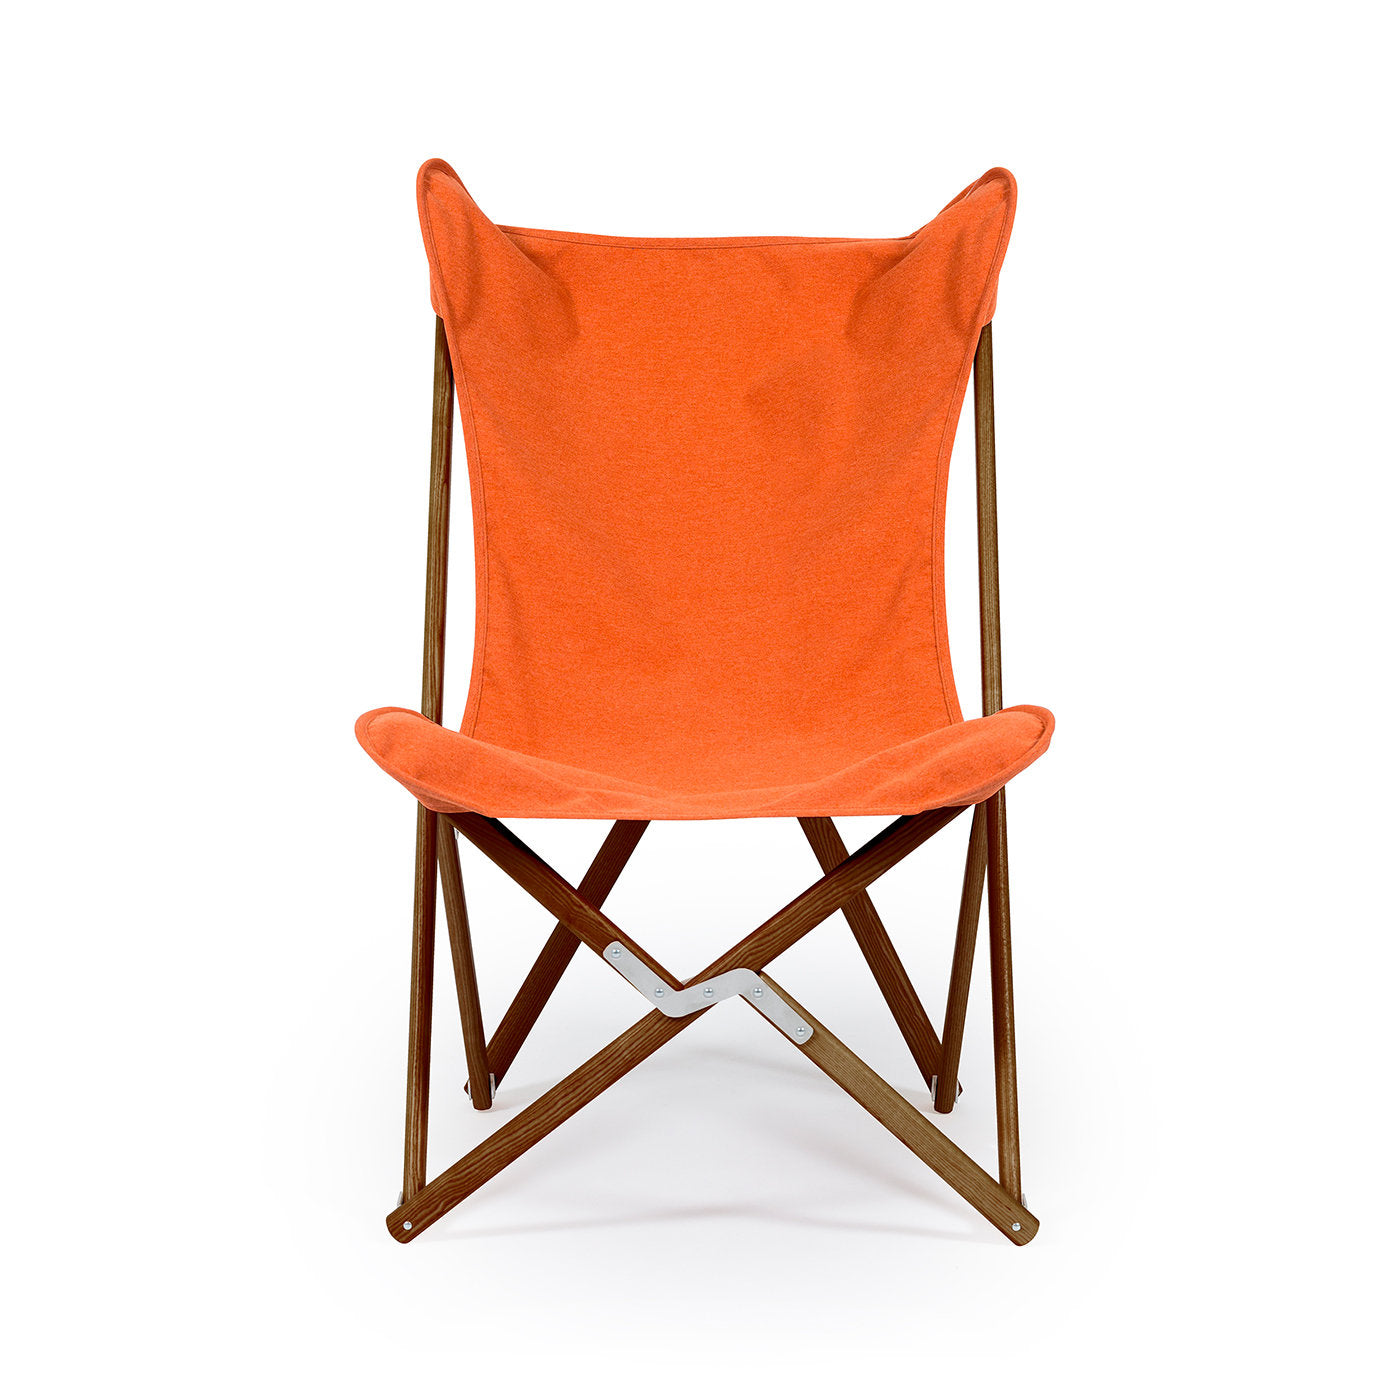 Tripolina Chair in Terracotta Red - Alternative view 1